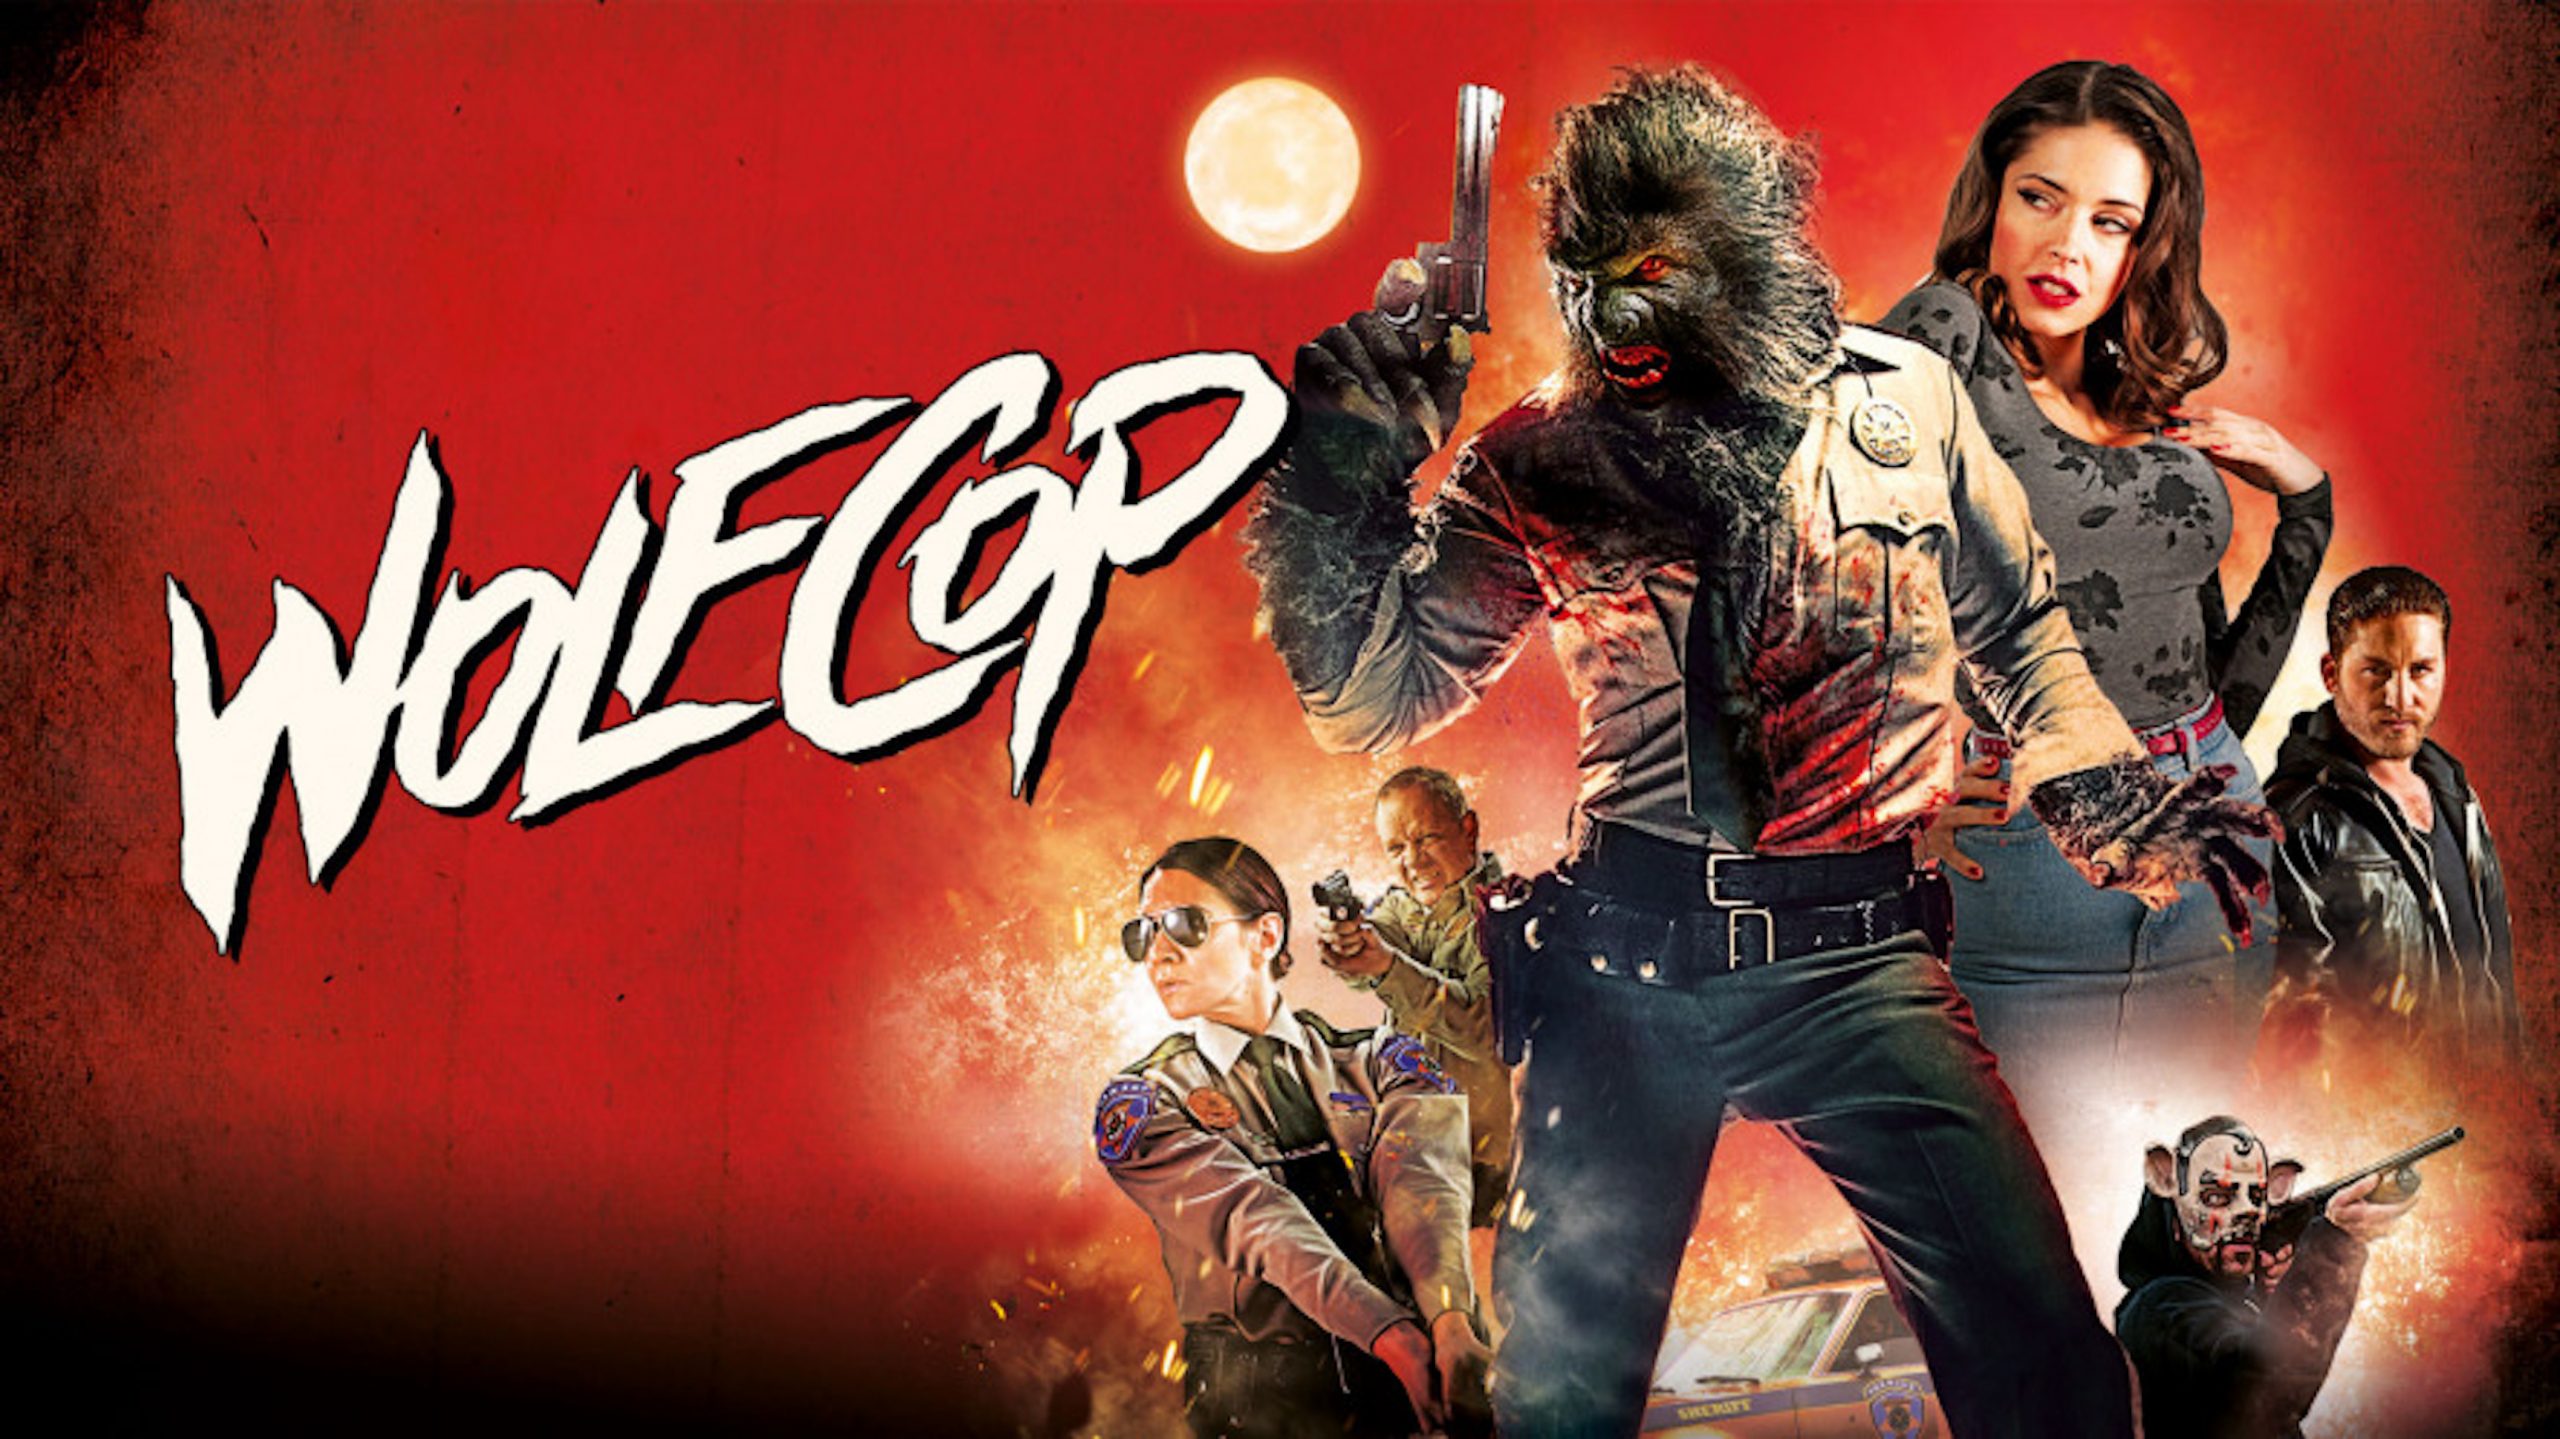 Wolfcop Tells A Graphic And…Unconventional Superhero Story | 50 B Movies To See Before You Die